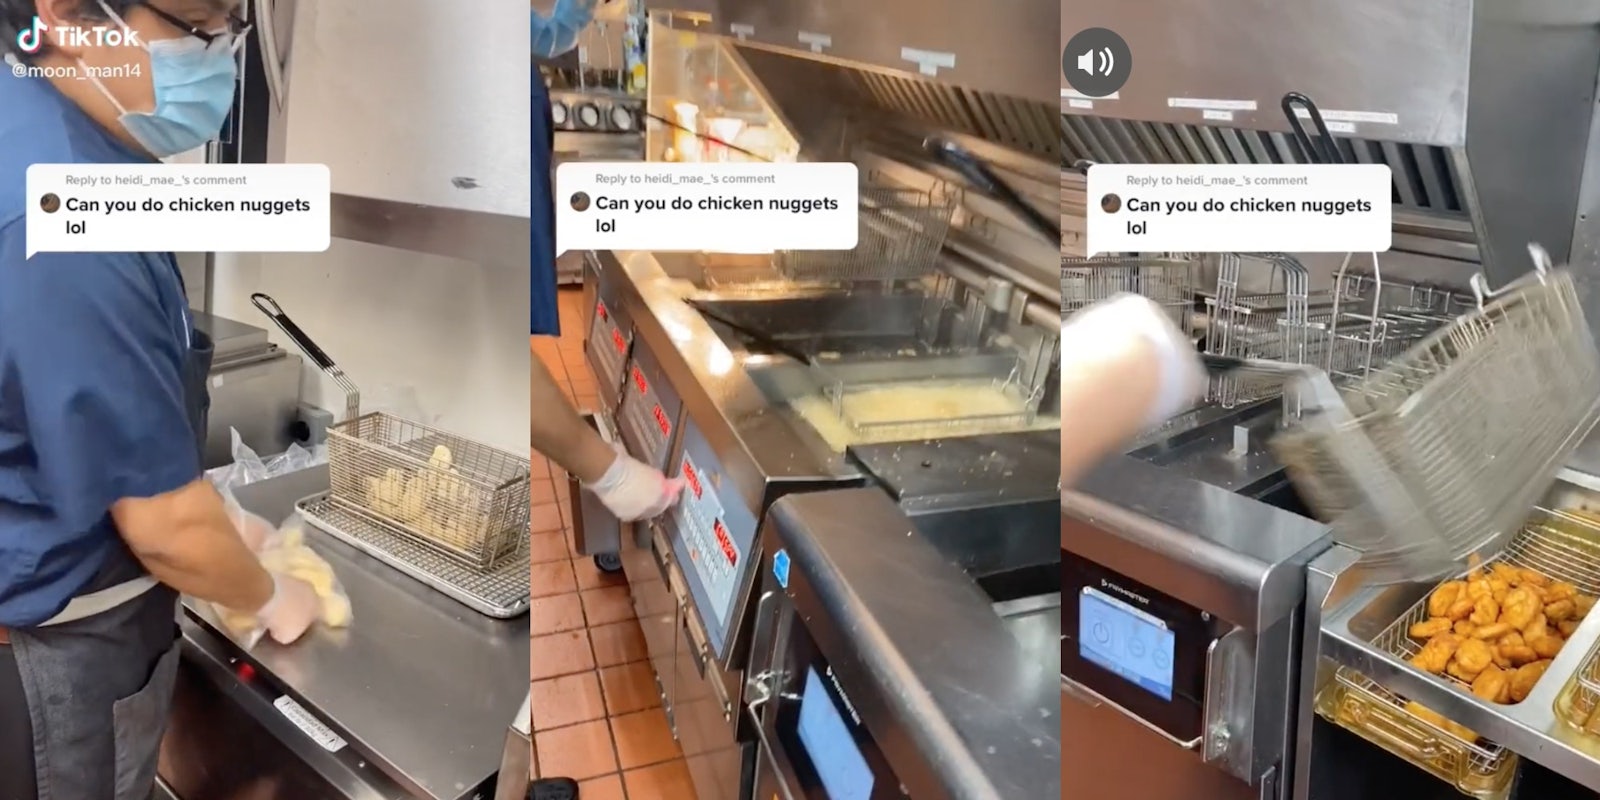 A TikTok video of a McDonald's employee making chicken nuggets